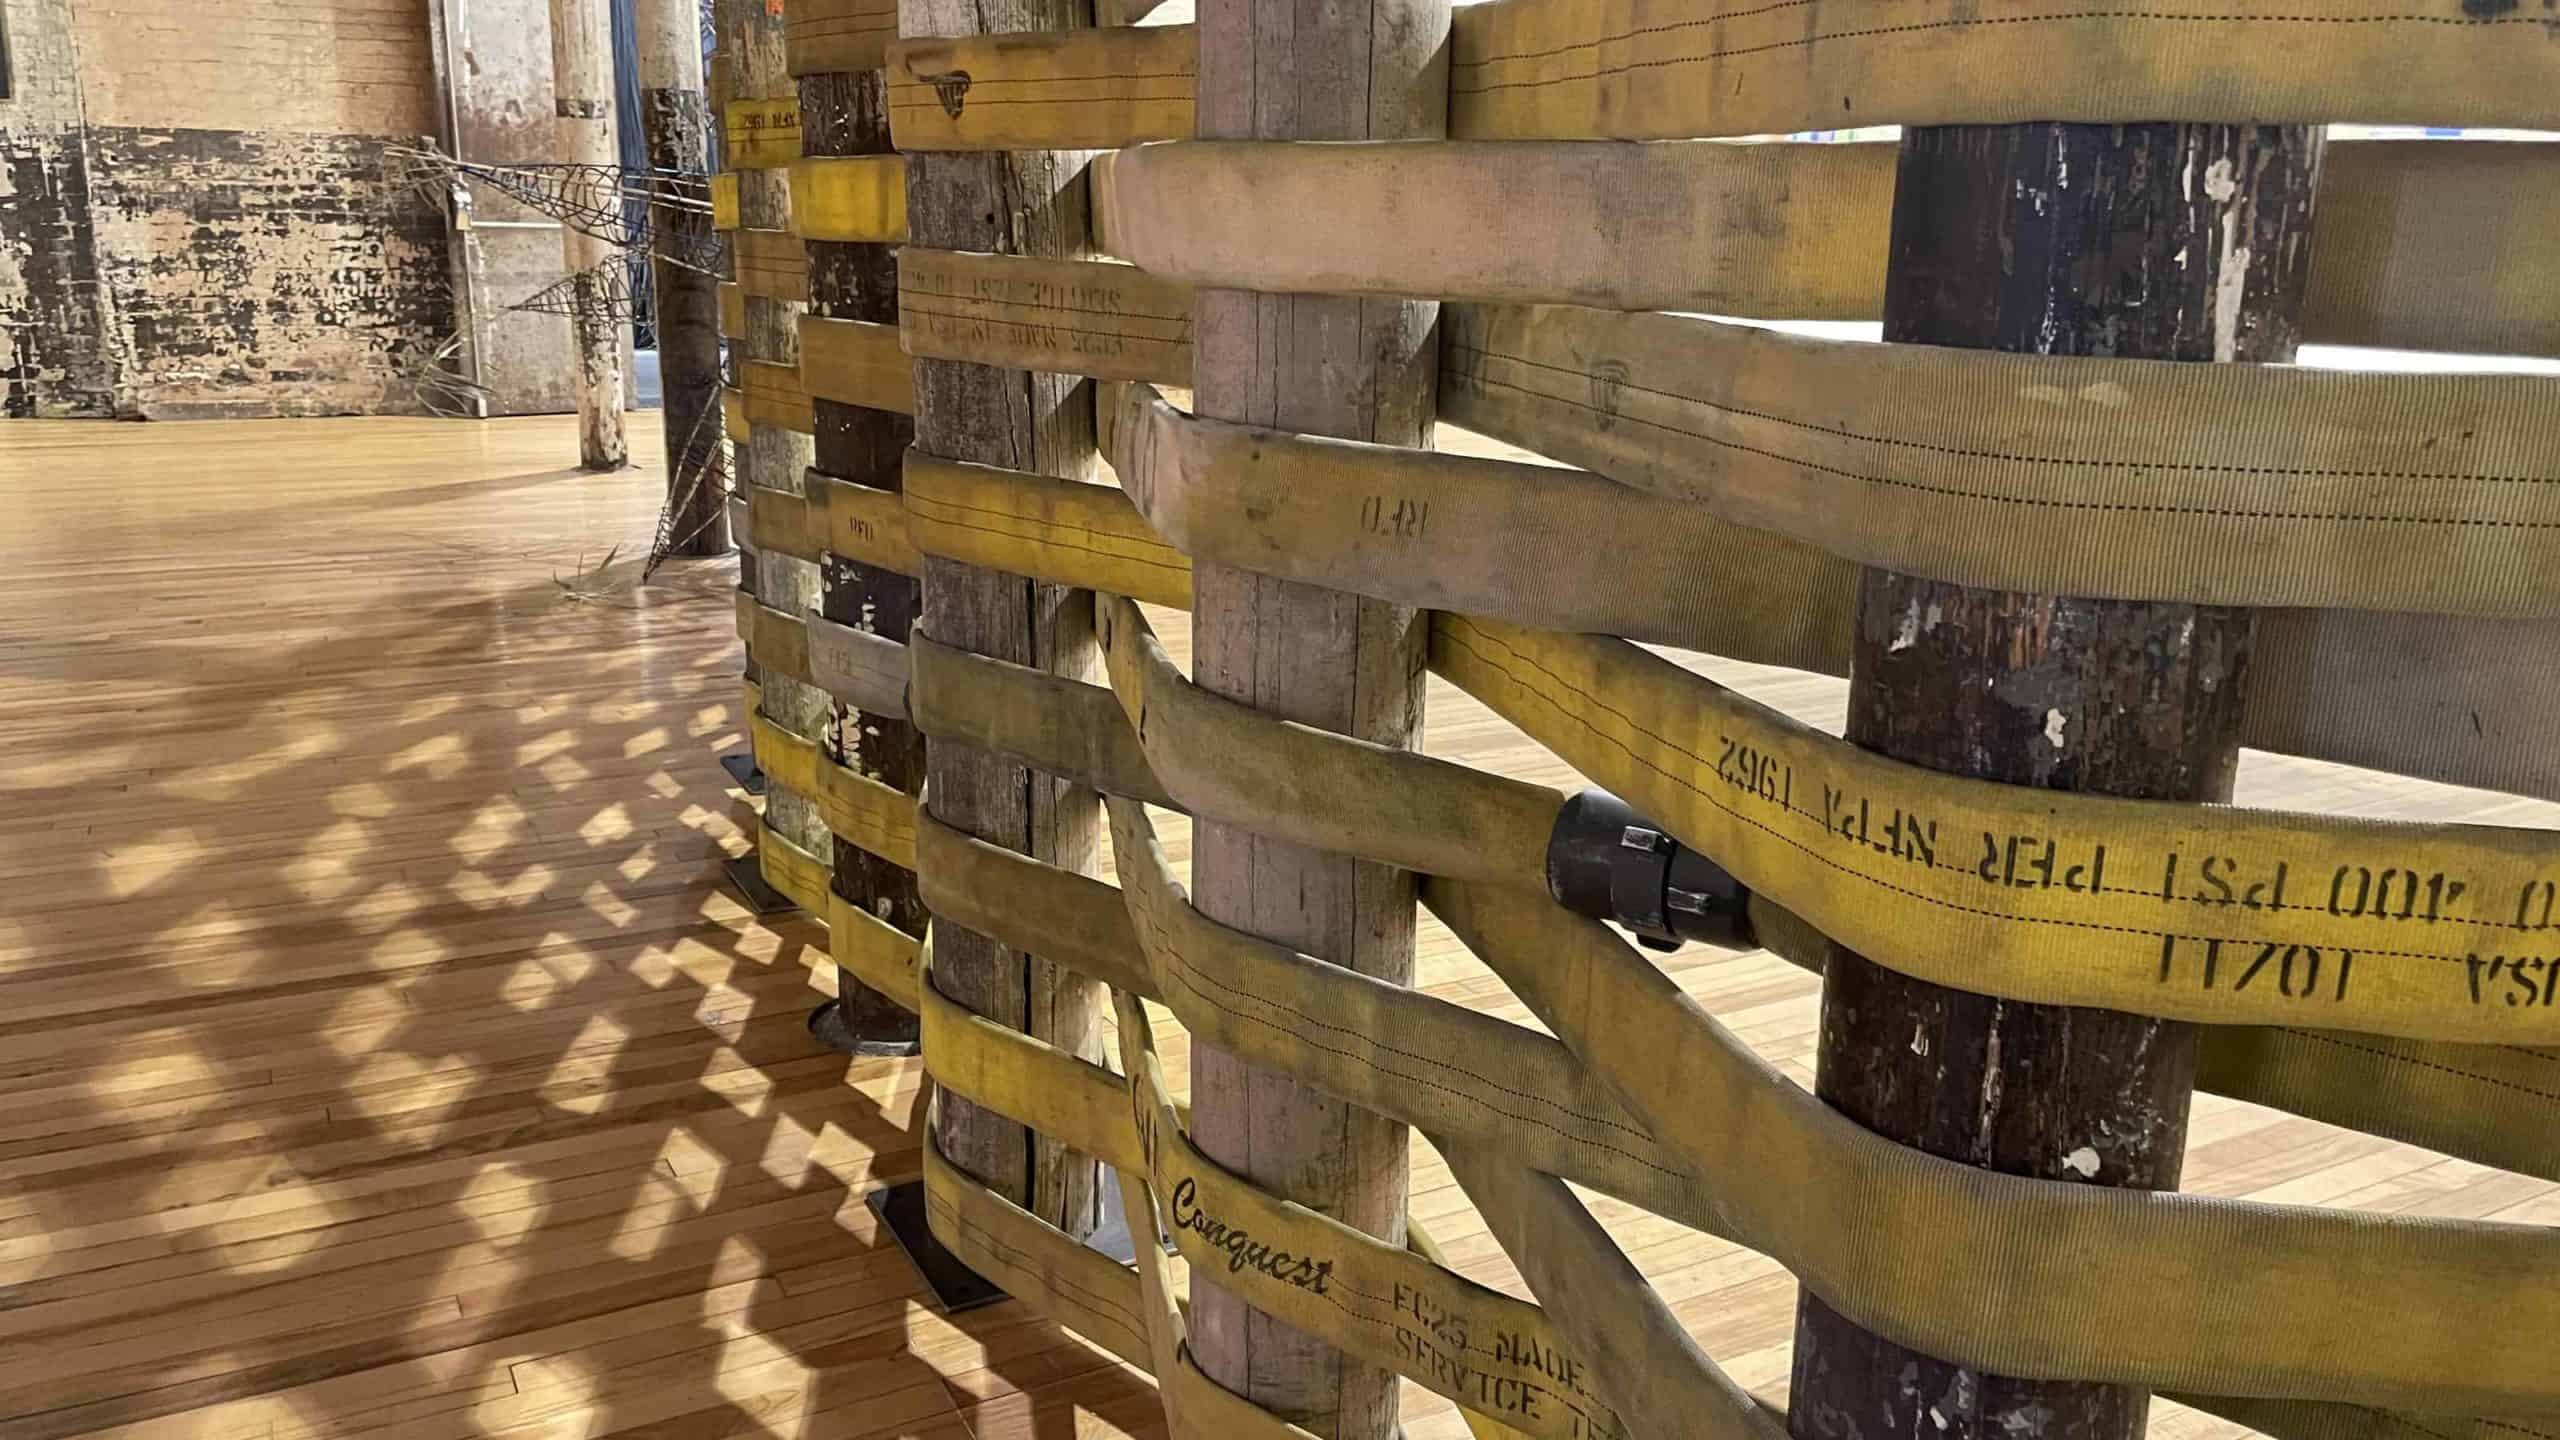 In Weep Holes at Mass MoCA, Lily Cox-Richard has woven a fire hose around pillars like a fiber around splints in a basket.